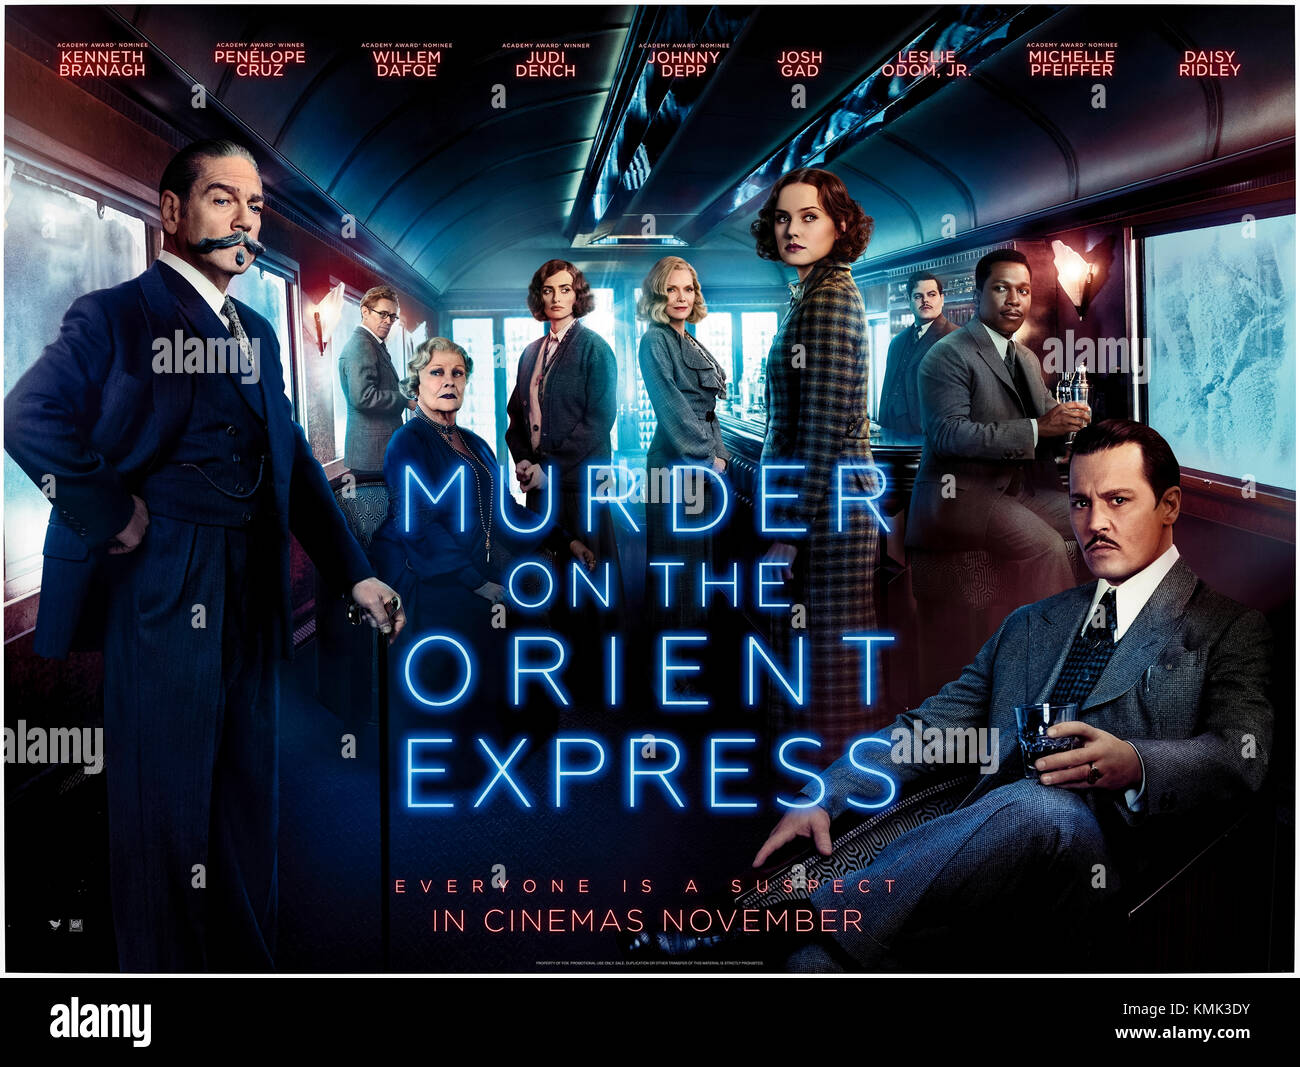 Murder on the Orient Express (2017) directed by Kenneth Branagh and starring Kenneth Branagh, Penélope Cruz, Willem Dafoe, Judi Dench and Johnny Depp. Hercule Poirot returns to the big screen in a new adaptation of the classic Agatha Christie novel. Stock Photo